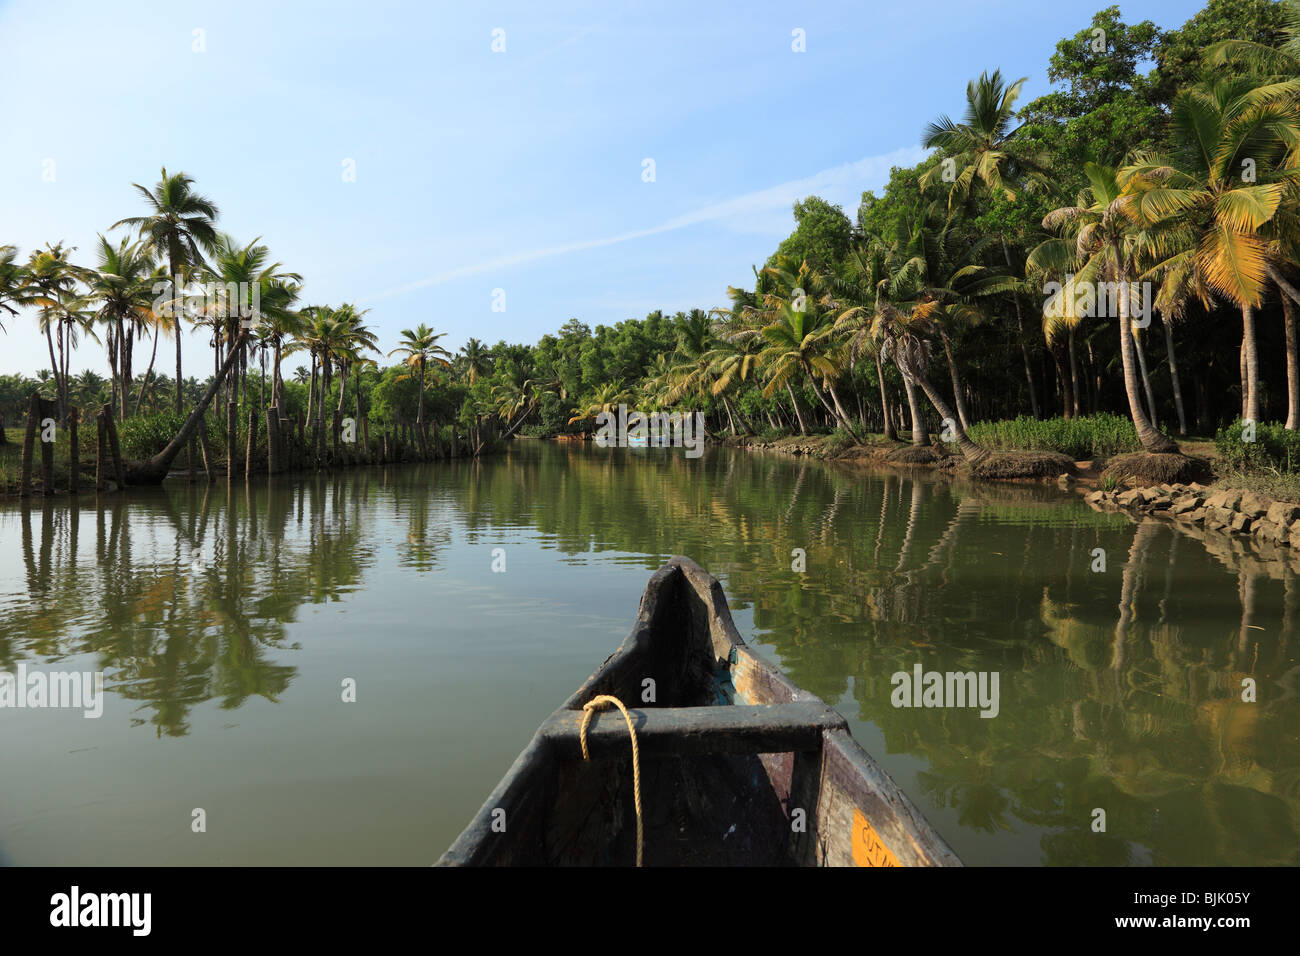 Backwater tour on a tributary of the Poovar River, Puvar, Kerala, South India, India, Asia Stock Photo